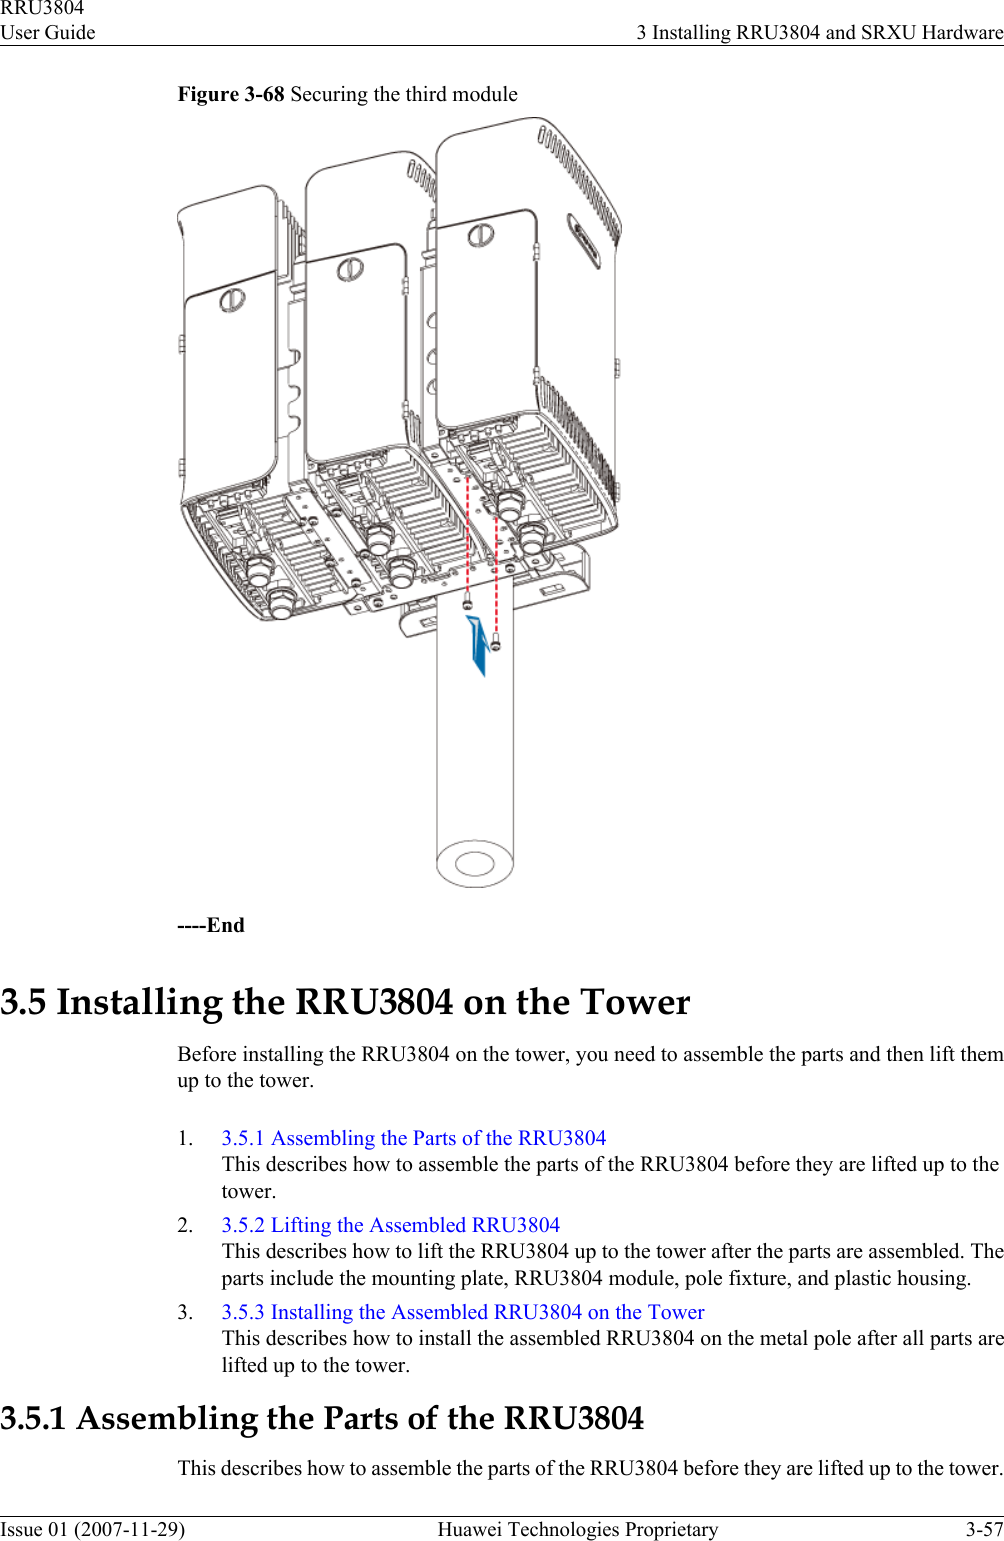 Figure 3-68 Securing the third module----End3.5 Installing the RRU3804 on the TowerBefore installing the RRU3804 on the tower, you need to assemble the parts and then lift themup to the tower.1. 3.5.1 Assembling the Parts of the RRU3804This describes how to assemble the parts of the RRU3804 before they are lifted up to thetower.2. 3.5.2 Lifting the Assembled RRU3804This describes how to lift the RRU3804 up to the tower after the parts are assembled. Theparts include the mounting plate, RRU3804 module, pole fixture, and plastic housing.3. 3.5.3 Installing the Assembled RRU3804 on the TowerThis describes how to install the assembled RRU3804 on the metal pole after all parts arelifted up to the tower.3.5.1 Assembling the Parts of the RRU3804This describes how to assemble the parts of the RRU3804 before they are lifted up to the tower.RRU3804User Guide 3 Installing RRU3804 and SRXU HardwareIssue 01 (2007-11-29)  Huawei Technologies Proprietary 3-57